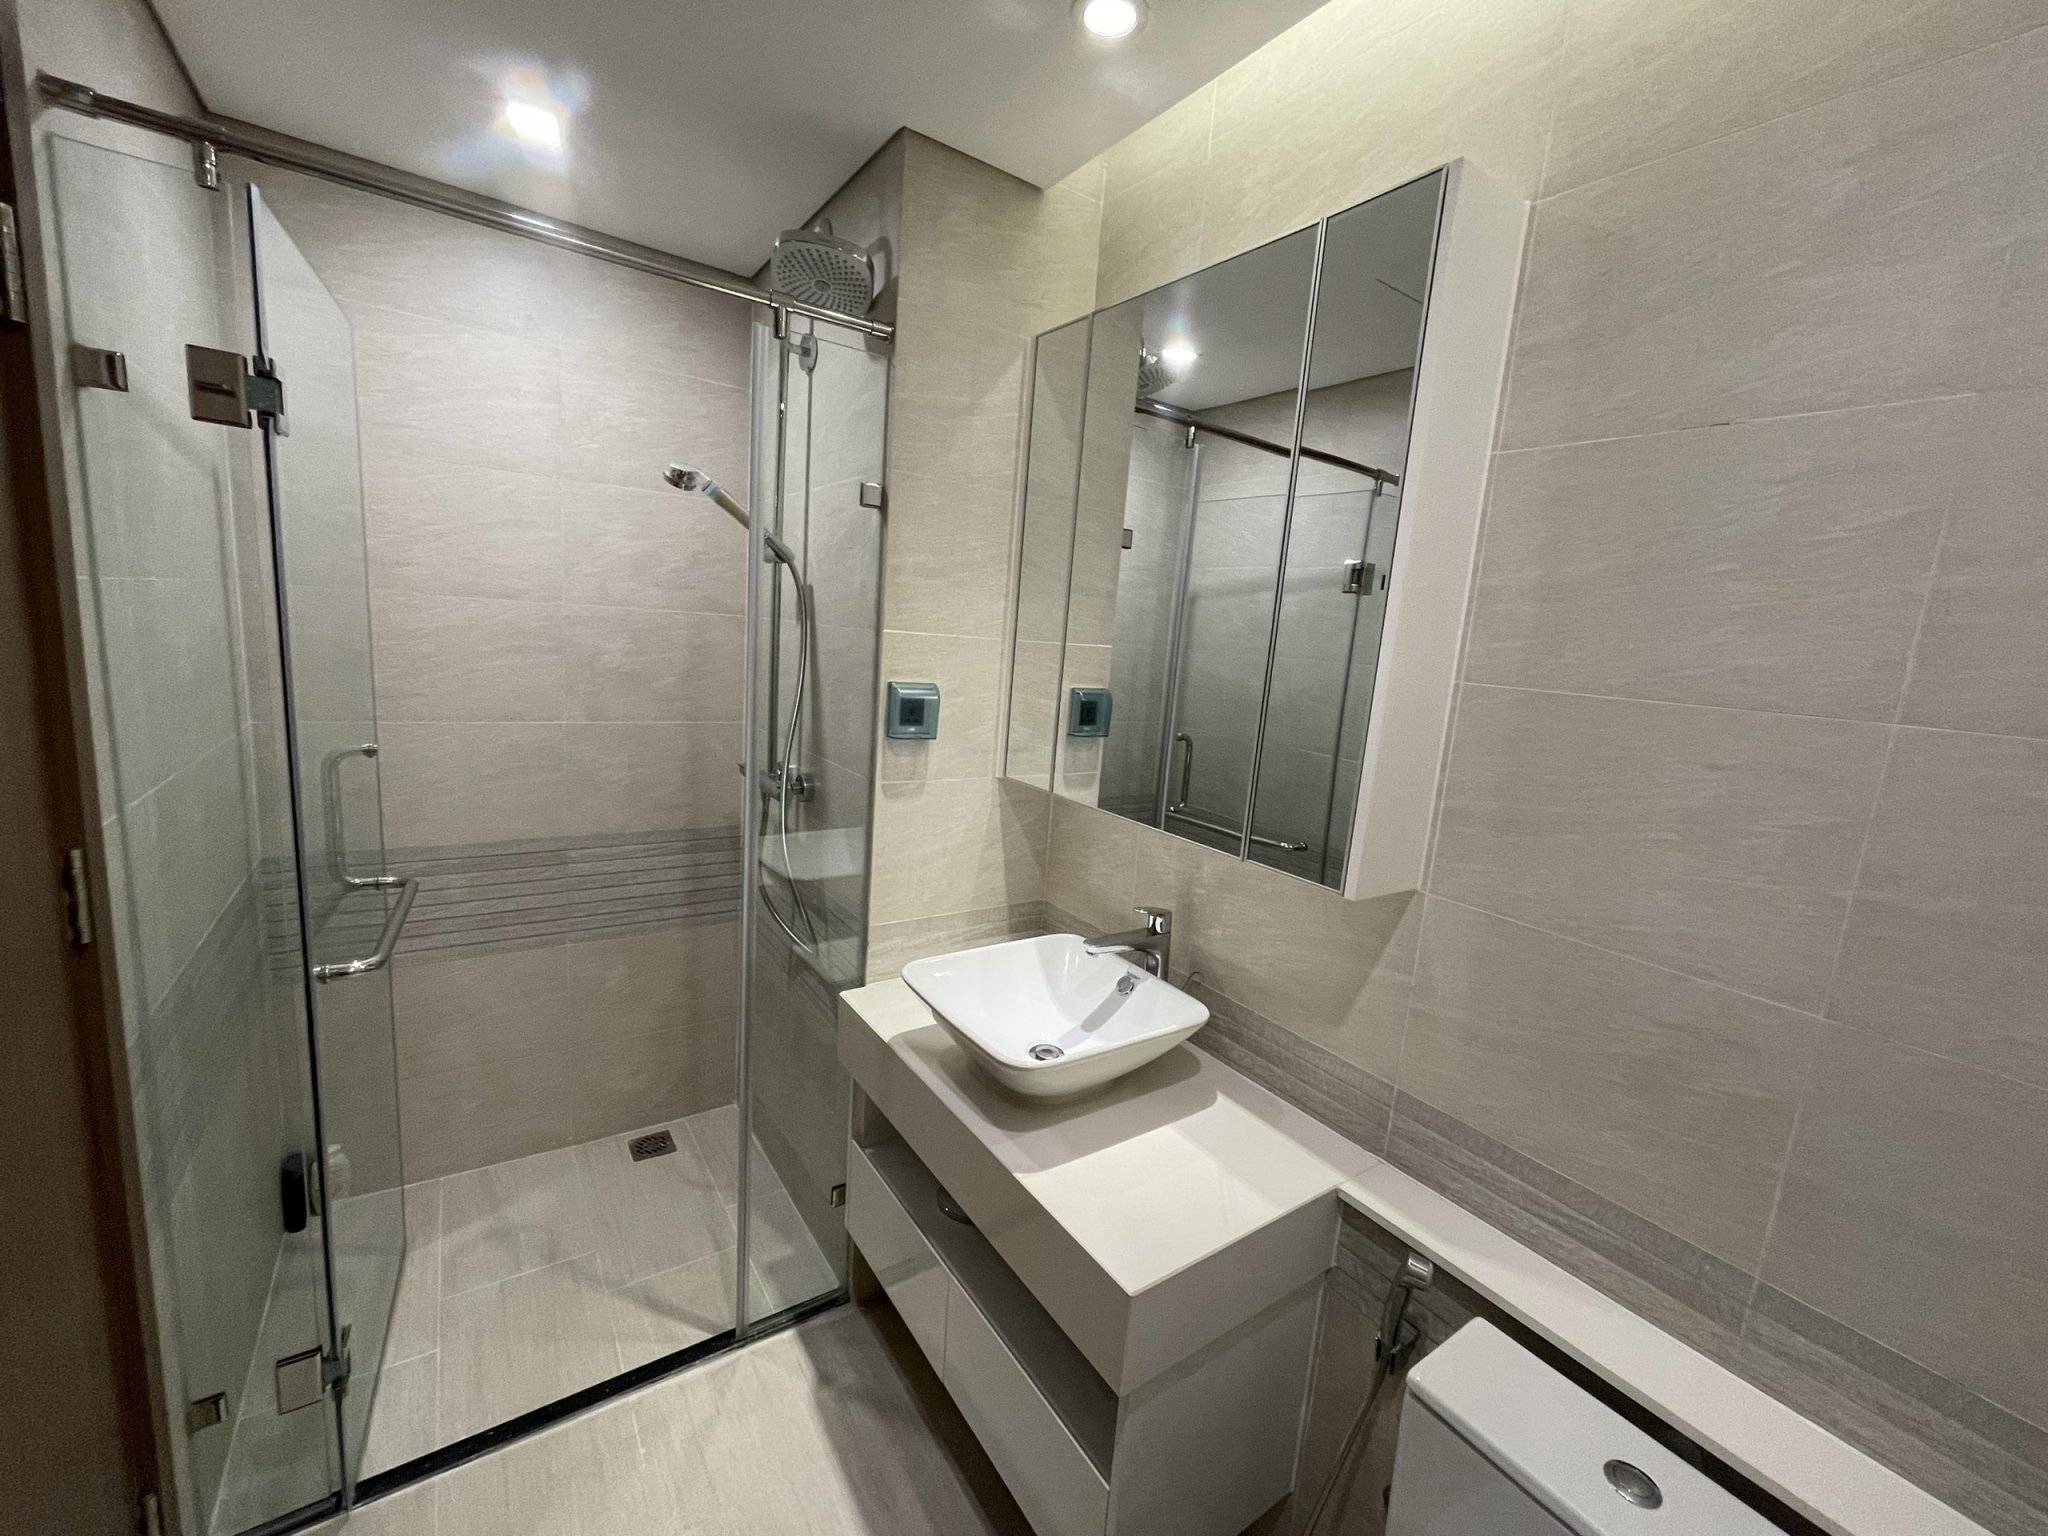 *2BR high floor* Luxury Apartment for Rent in Vinhomes Metropolis (available Jul 2022)